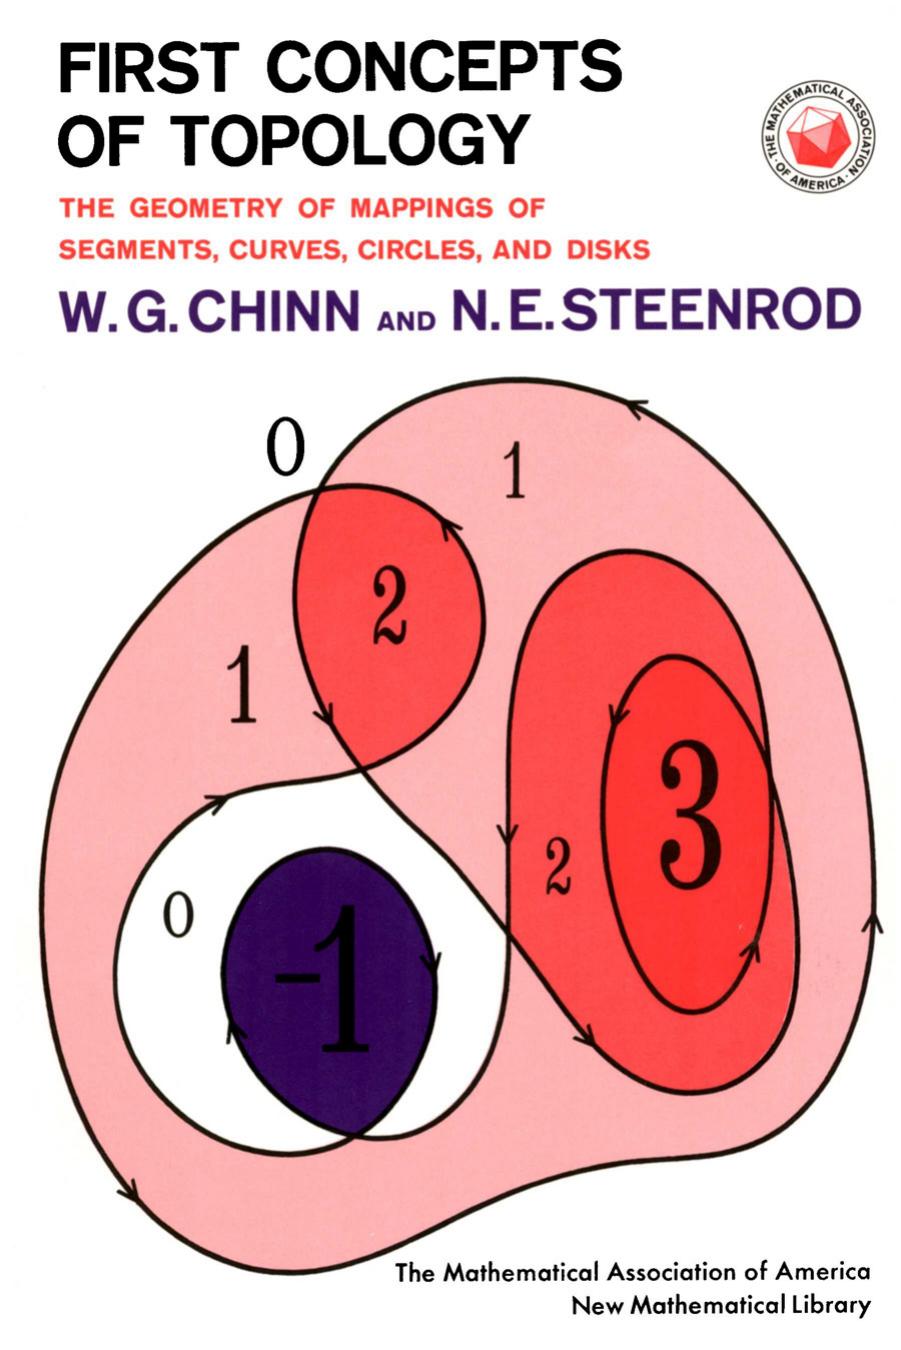 First Concepts of Topology: The Geometry of Mappings of Segments, Curves, Circles, and Disks by W. G. Chinn and N. E. Steenrod